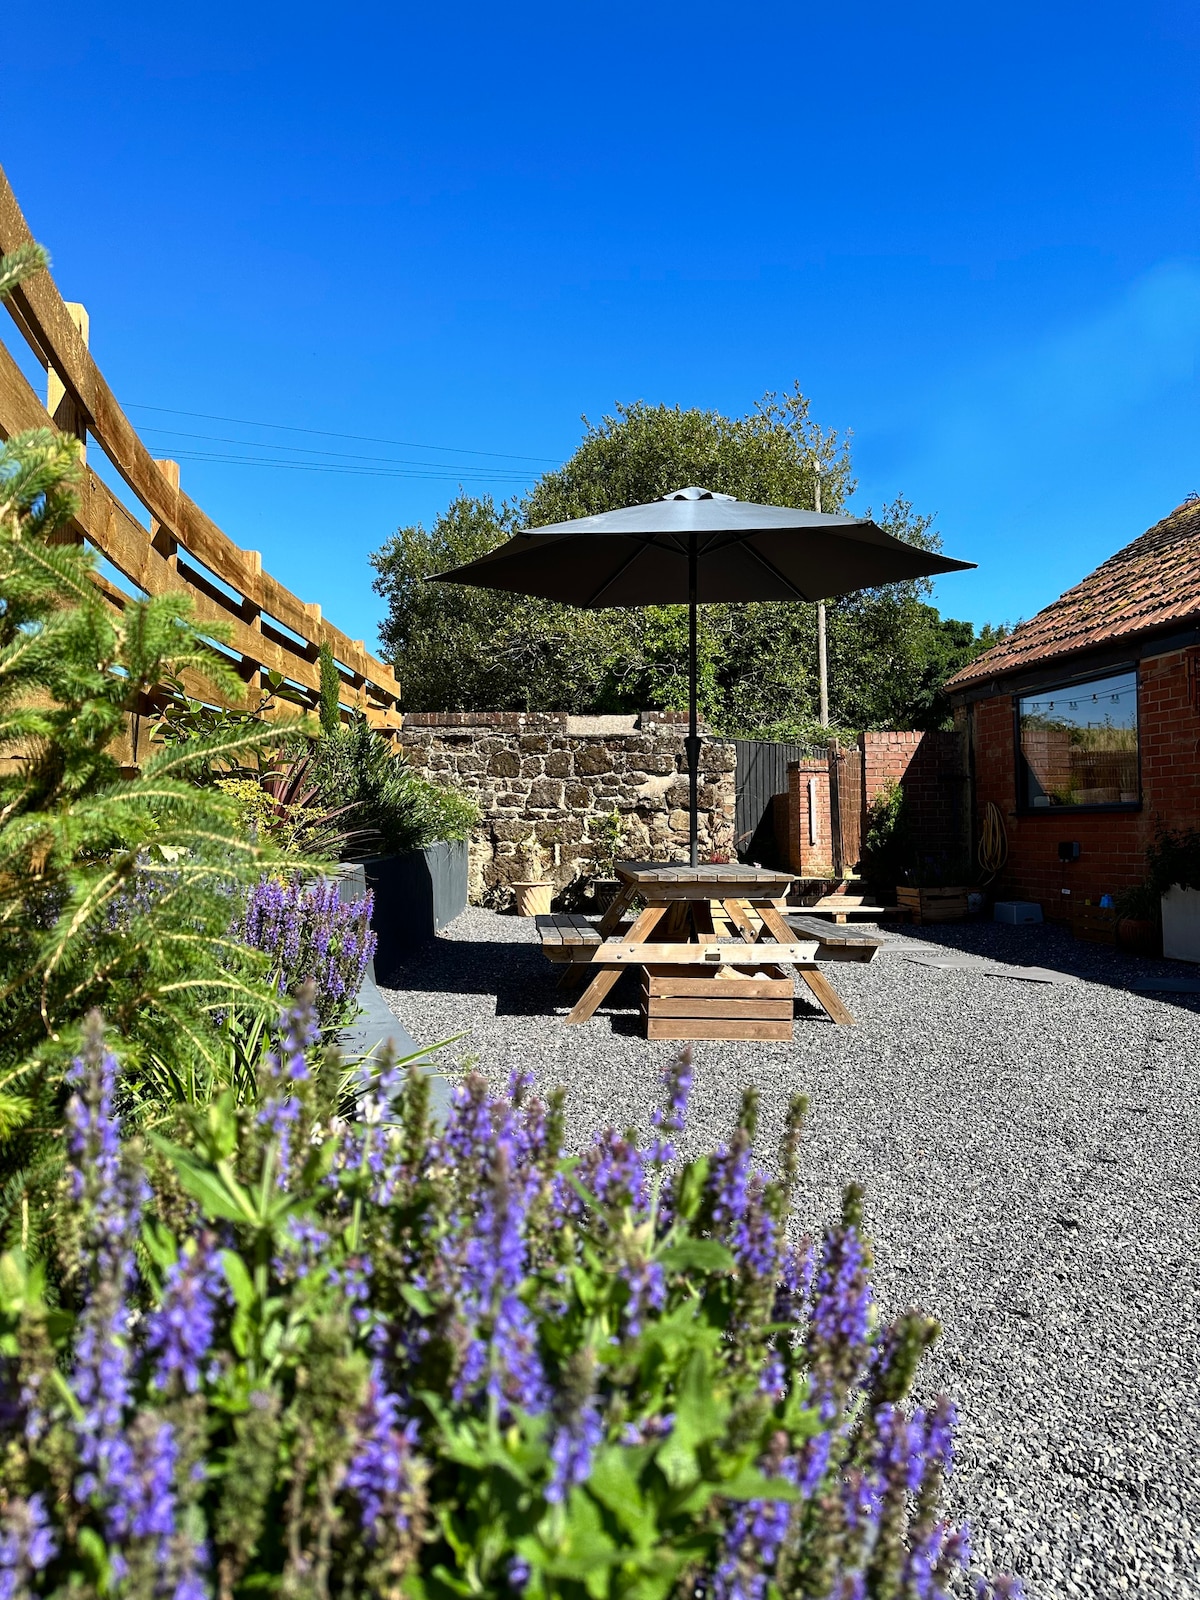 The Wimberry | 1880 Converted Barn | Isle of Wight